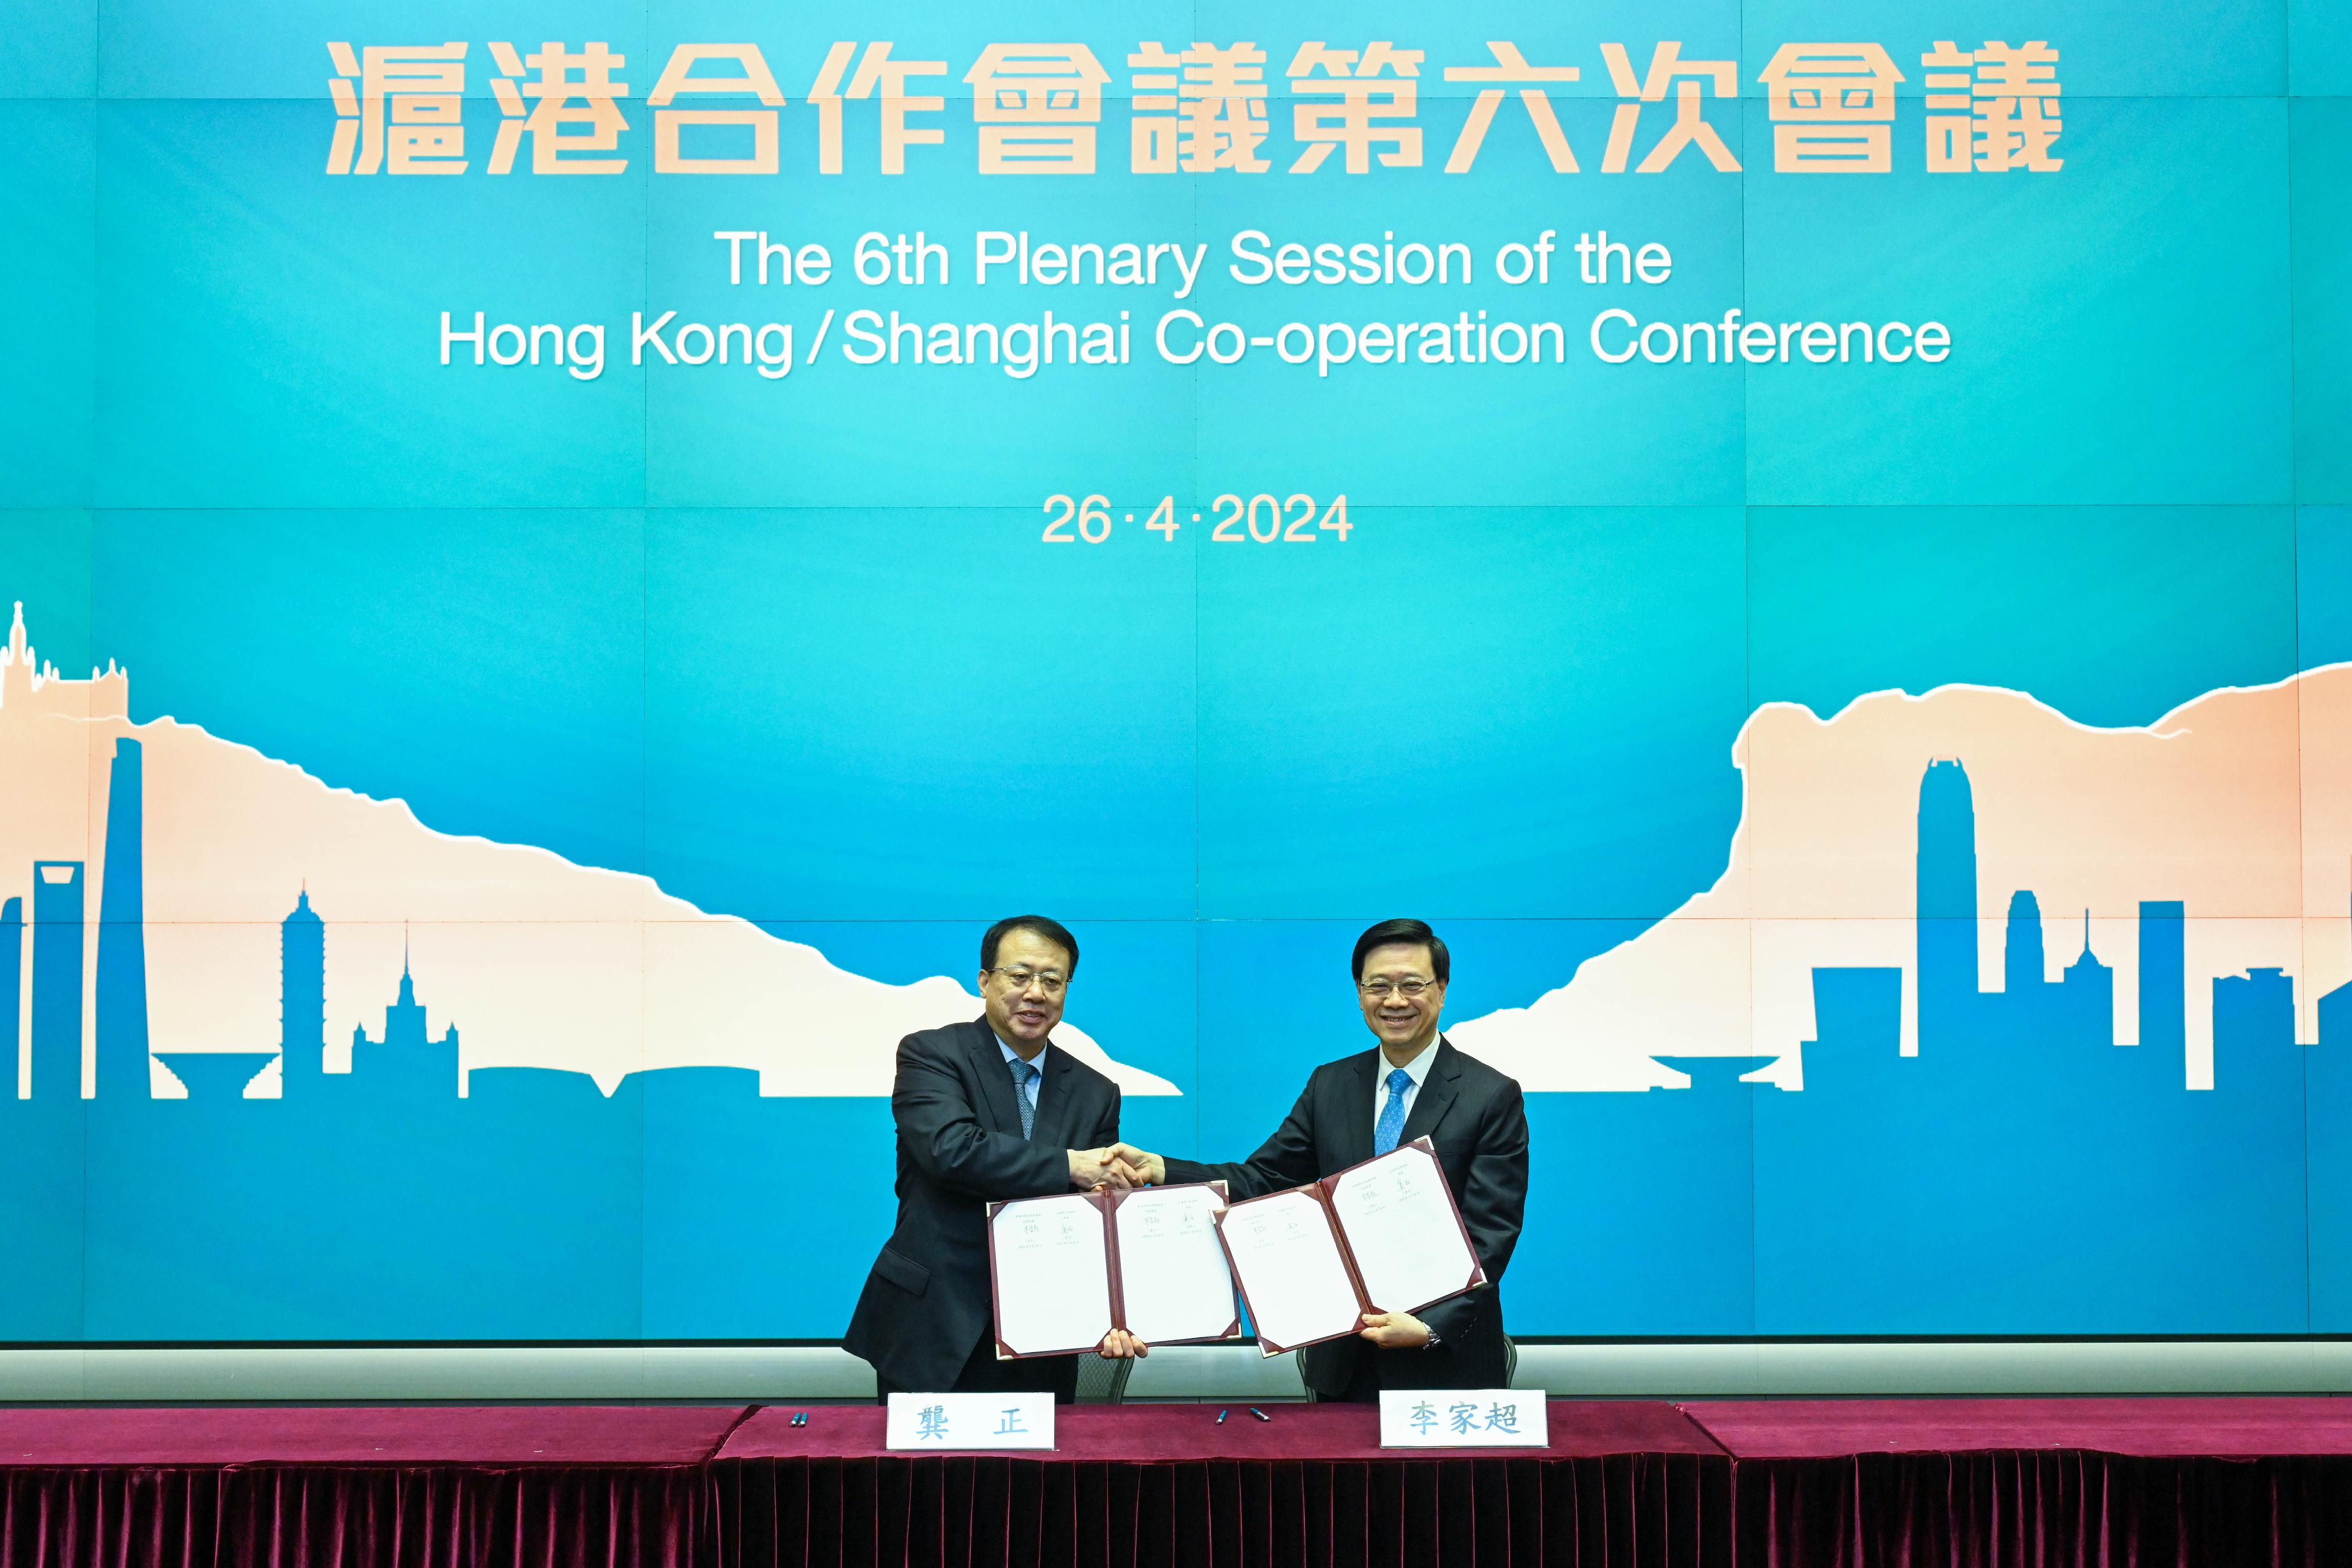 The Chief Executive, Mr John Lee, and the Mayor of Shanghai, Mr Gong Zheng, leading delegations of the governments of the Hong Kong Special Administrative Region and Shanghai respectively, held the Sixth Plenary Session of the Hong Kong/Shanghai Co-operation Conference in Hong Kong today (April 26). Mr Lee (right) and Mr Gong (left) signed the "Co-operation Memorandum of the Sixth Plenary Session Hong Kong/Shanghai Co-operation Conference".